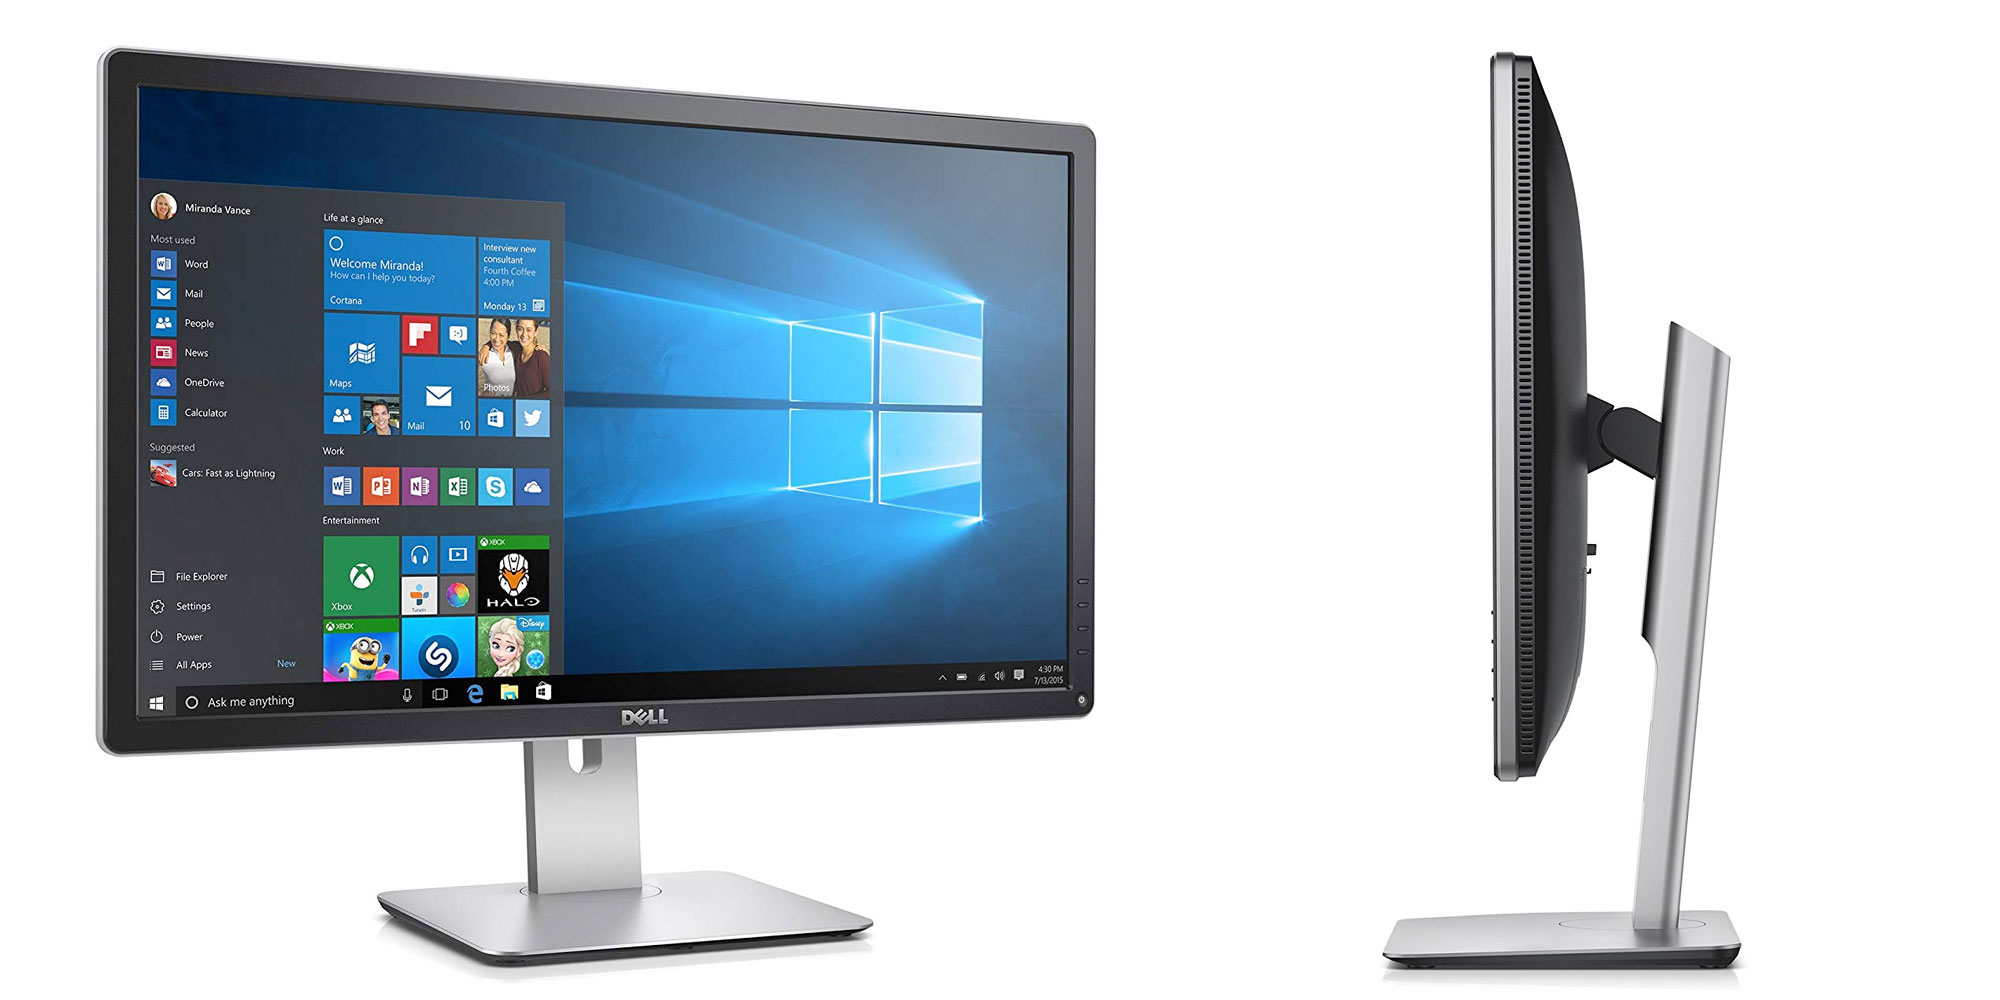 Dell's 27-inch 4K Monitor w/ HDMI & USB 3.0 hub is down to $300 shipped